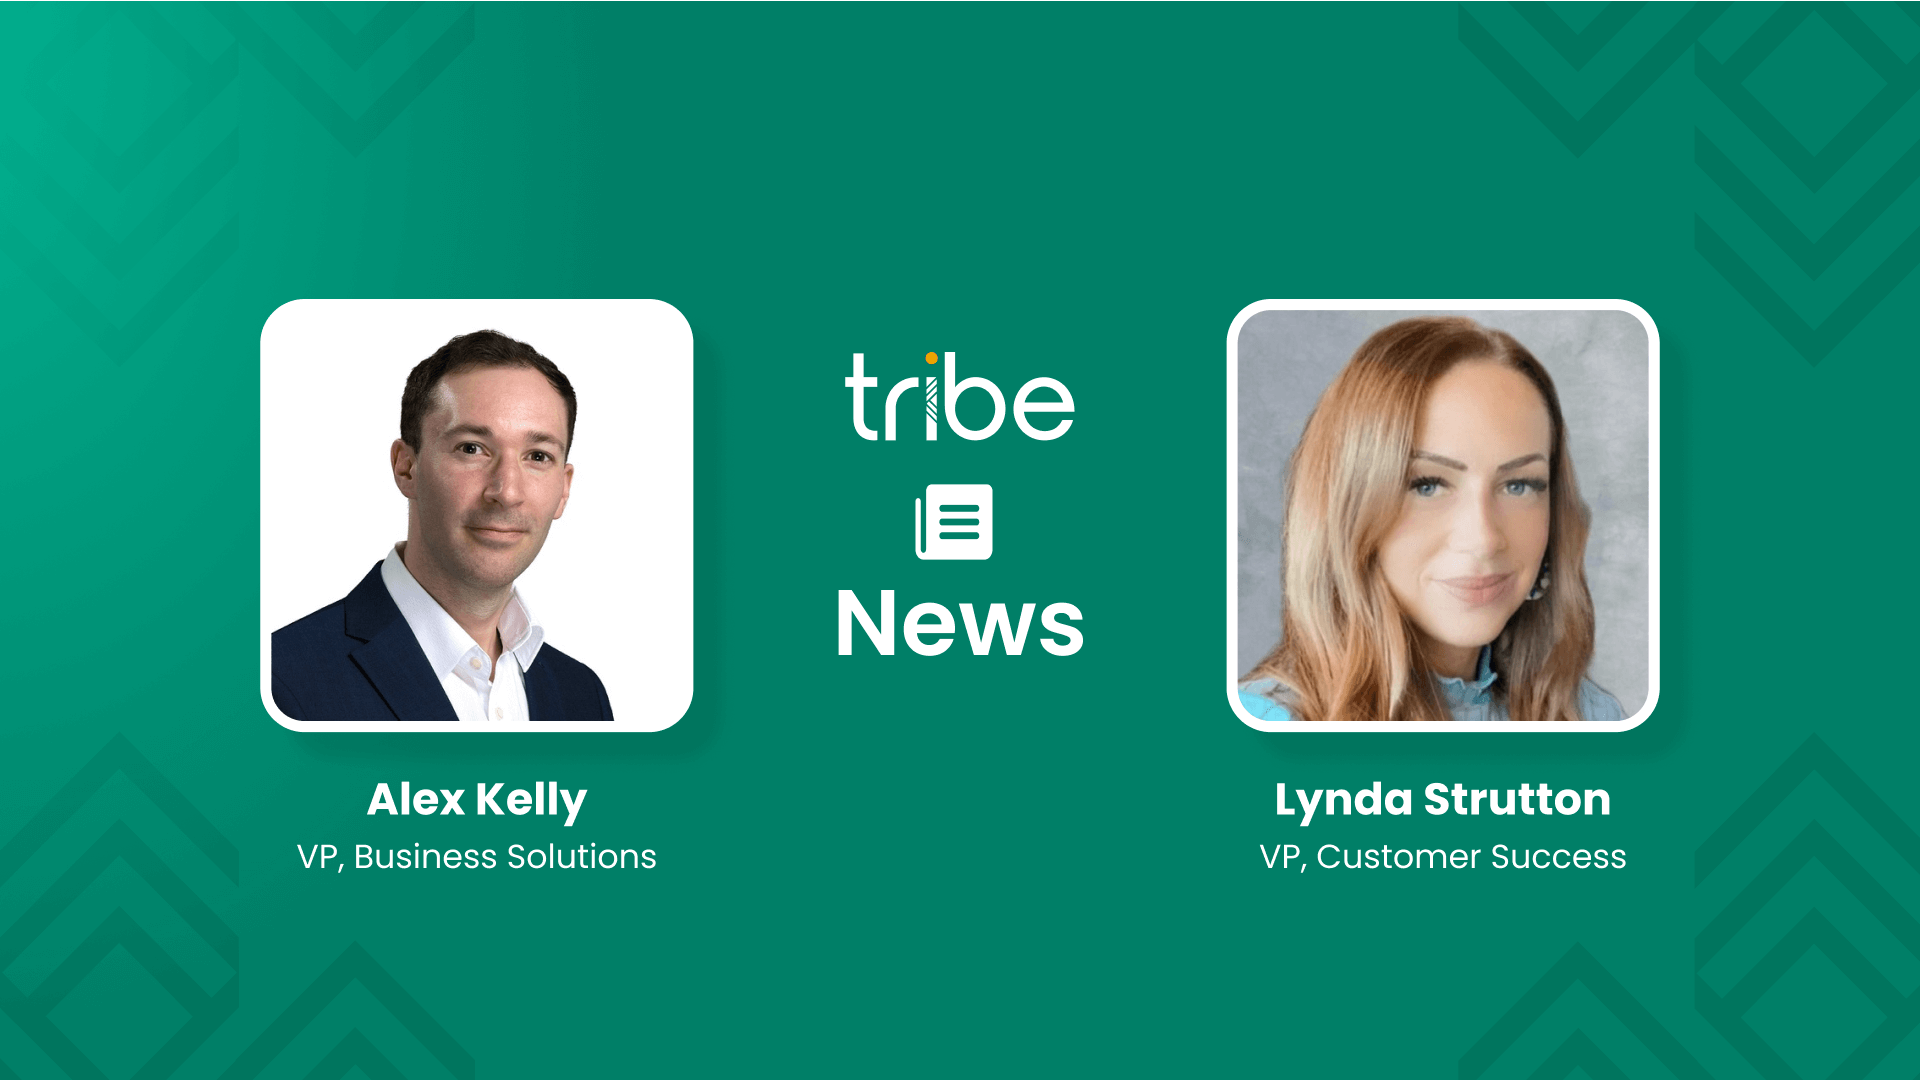 Tribe announces the appointment of Lynda Strutton, and a new role for Alex Kelly